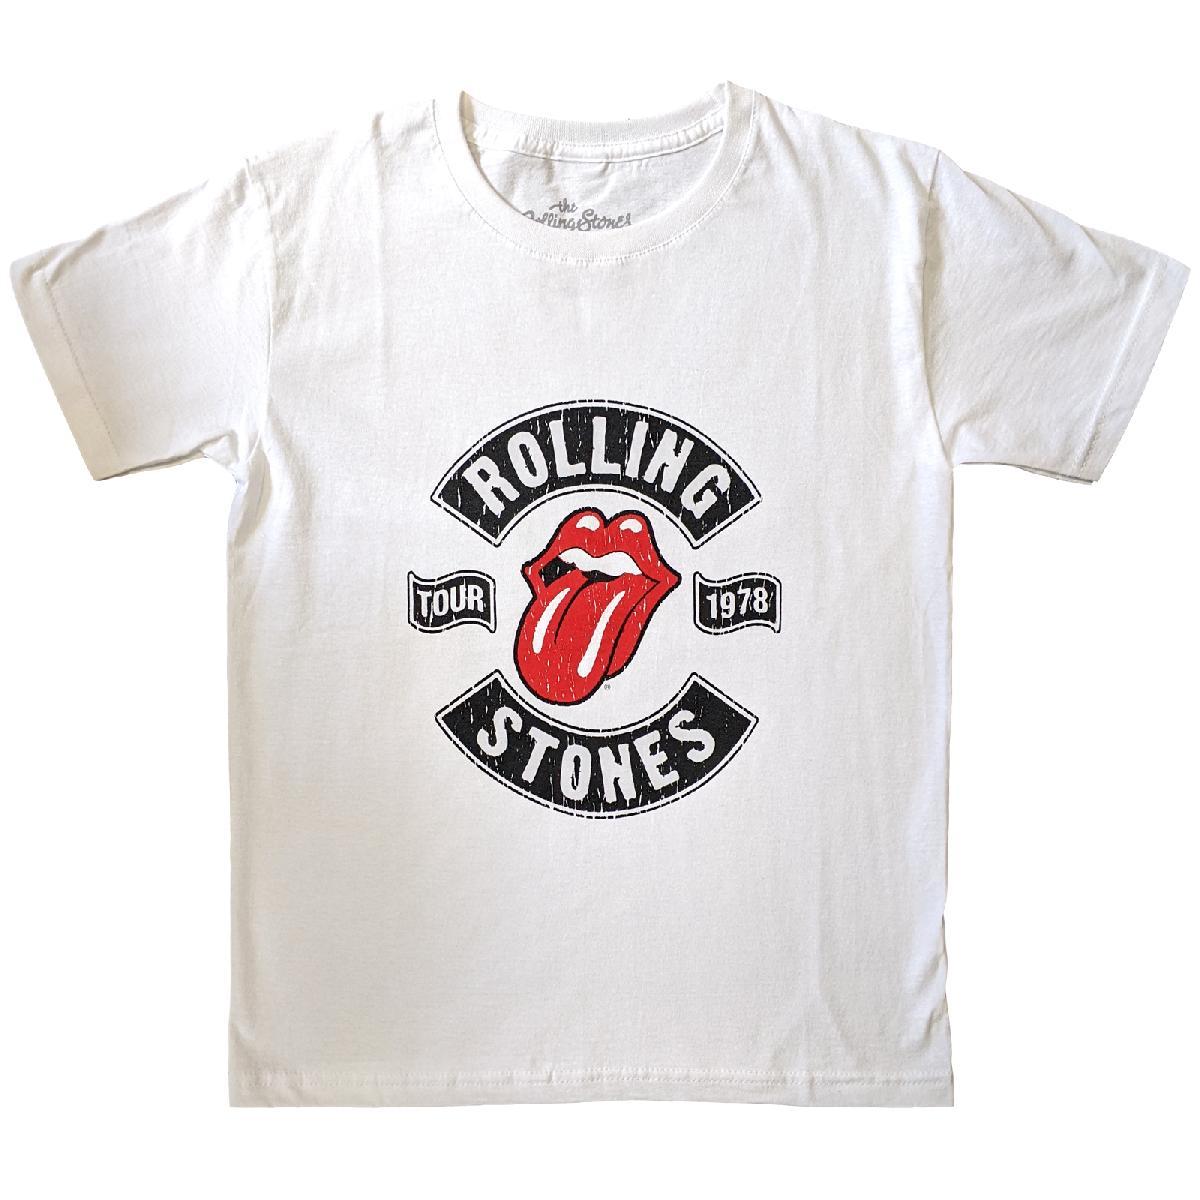 THE ROLLING STONES US Tour 1978